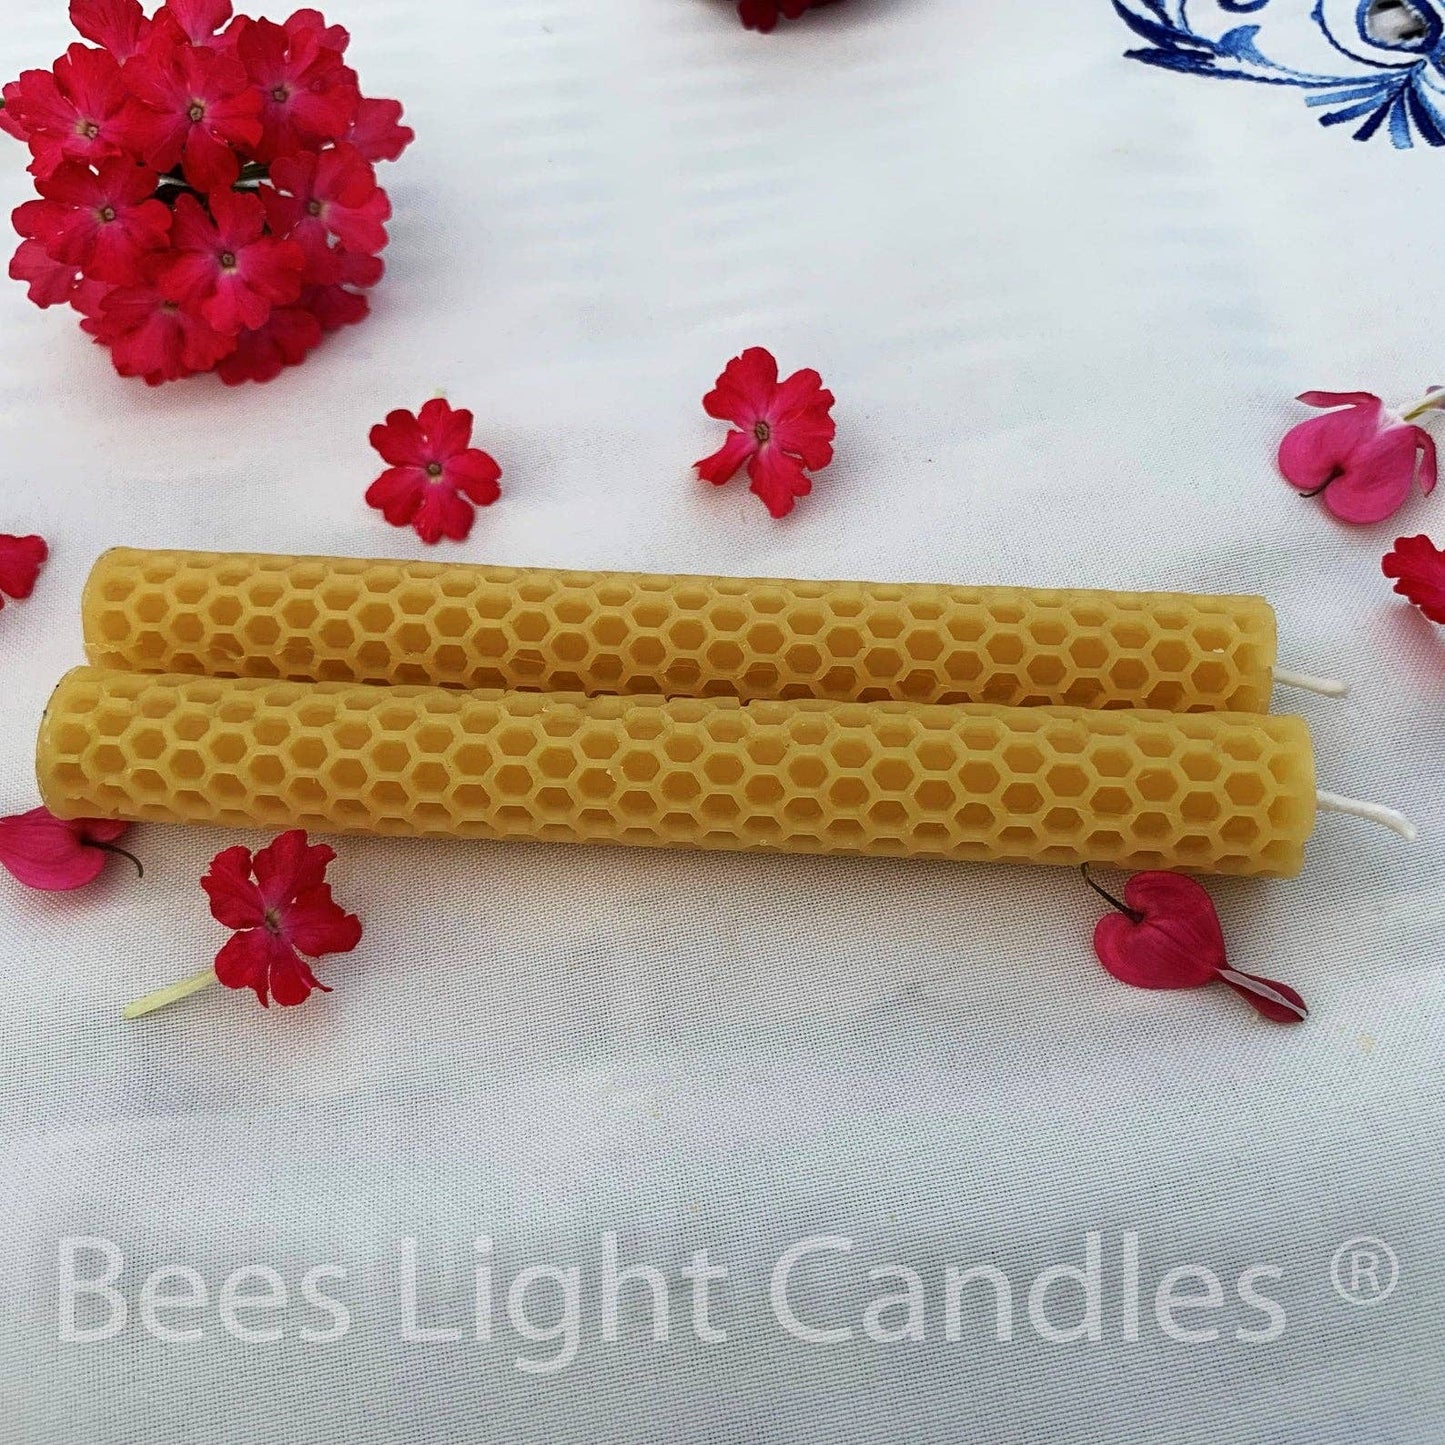 100% Pure and Natural Beeswax Honeycomb Taper Candles